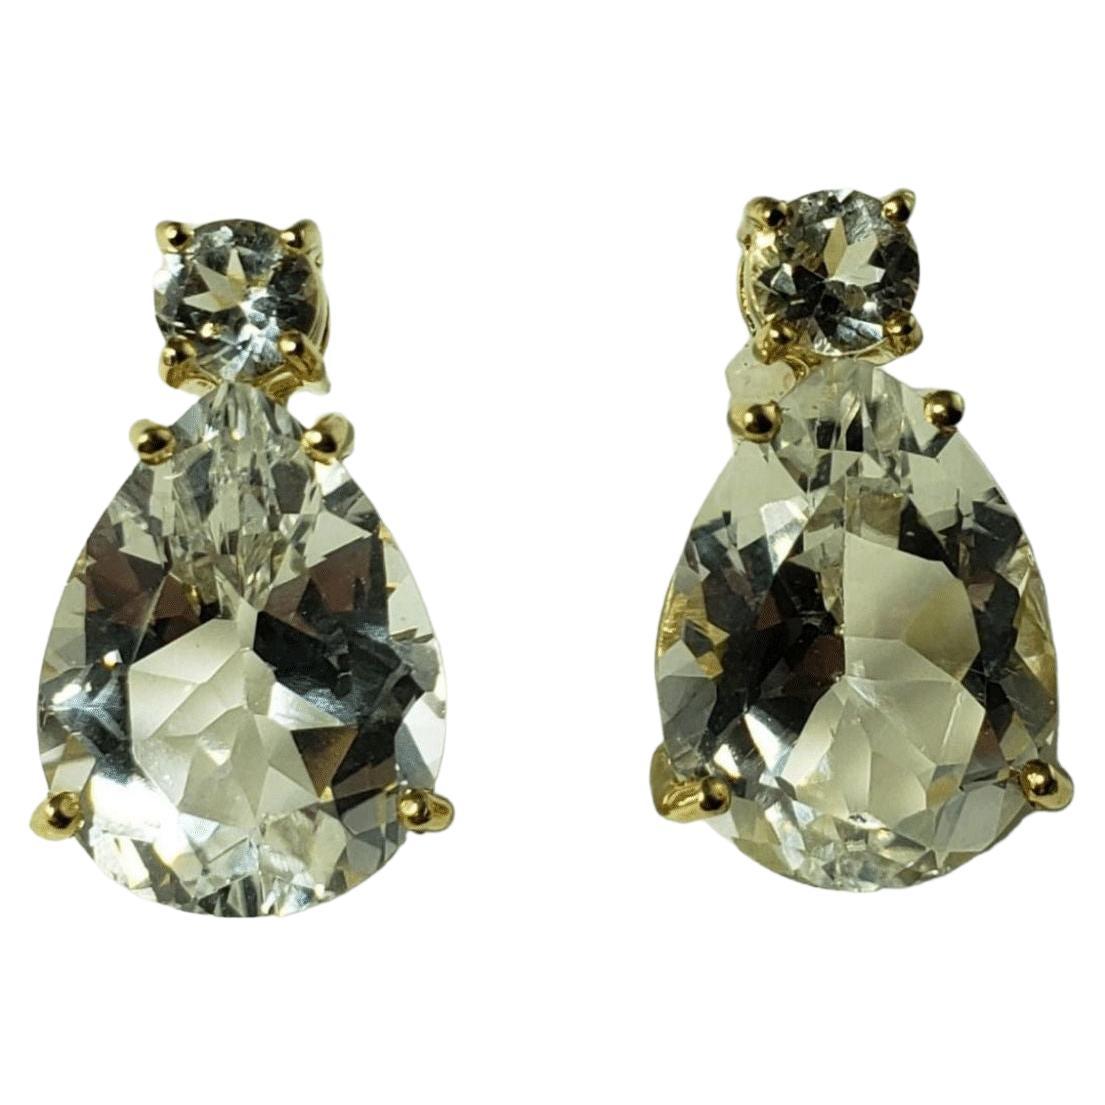 10 Karat Yellow Gold and White Topaz Earrings #13696 For Sale